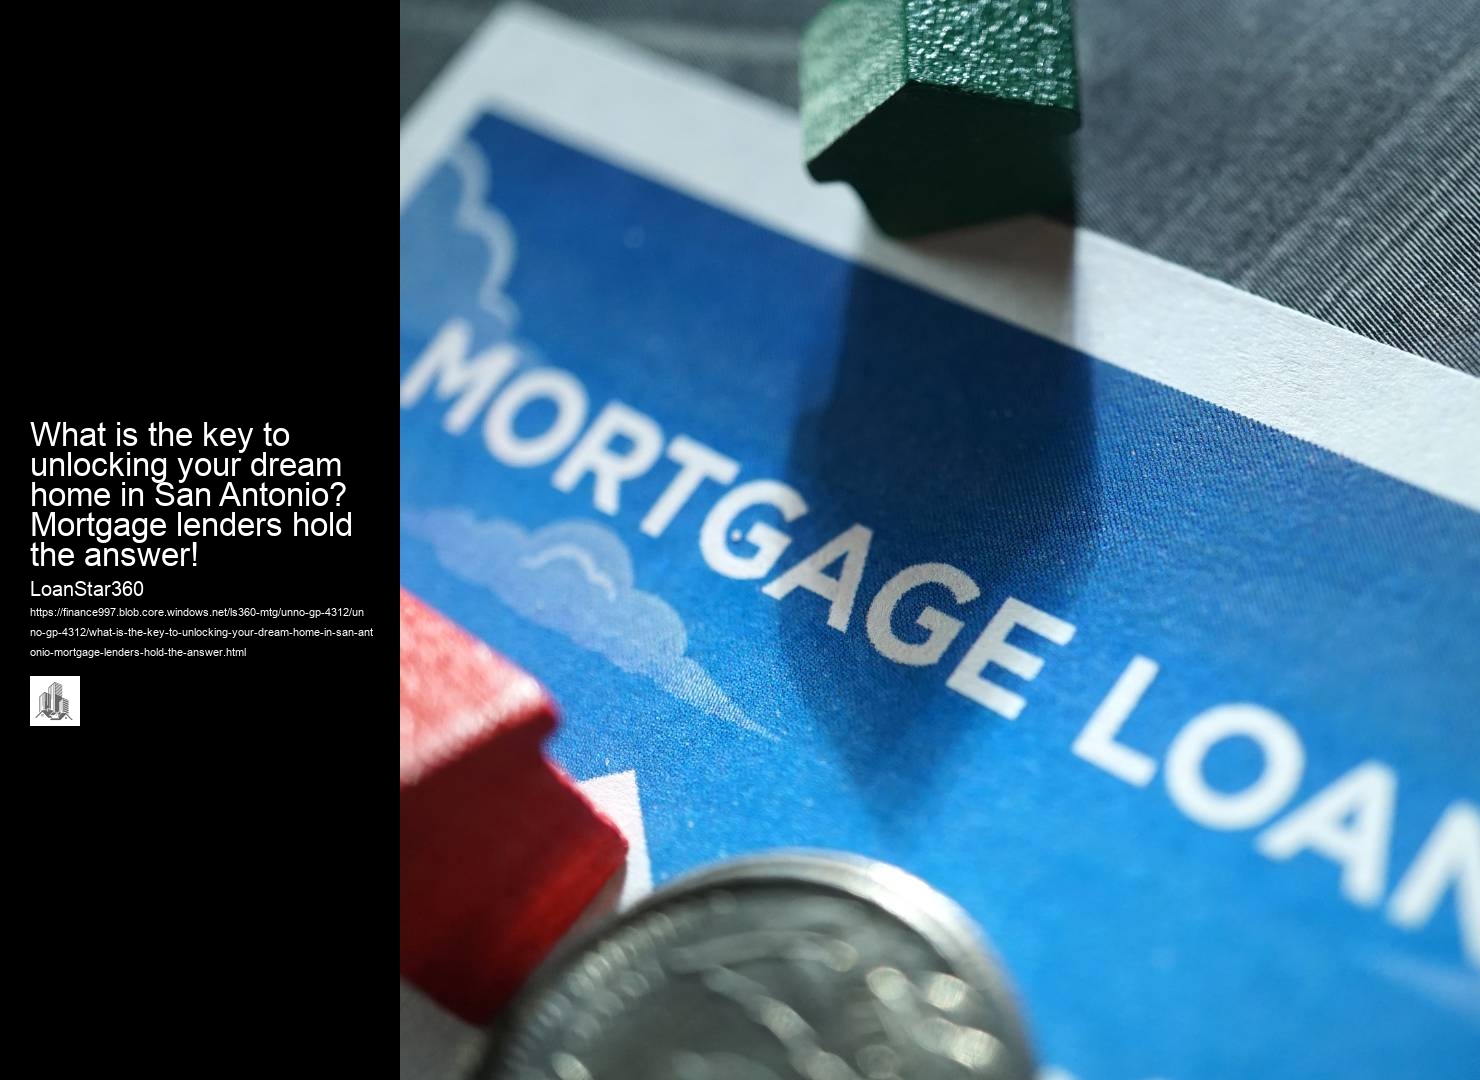 What is the key to unlocking your dream home in San Antonio? Mortgage lenders hold the answer!